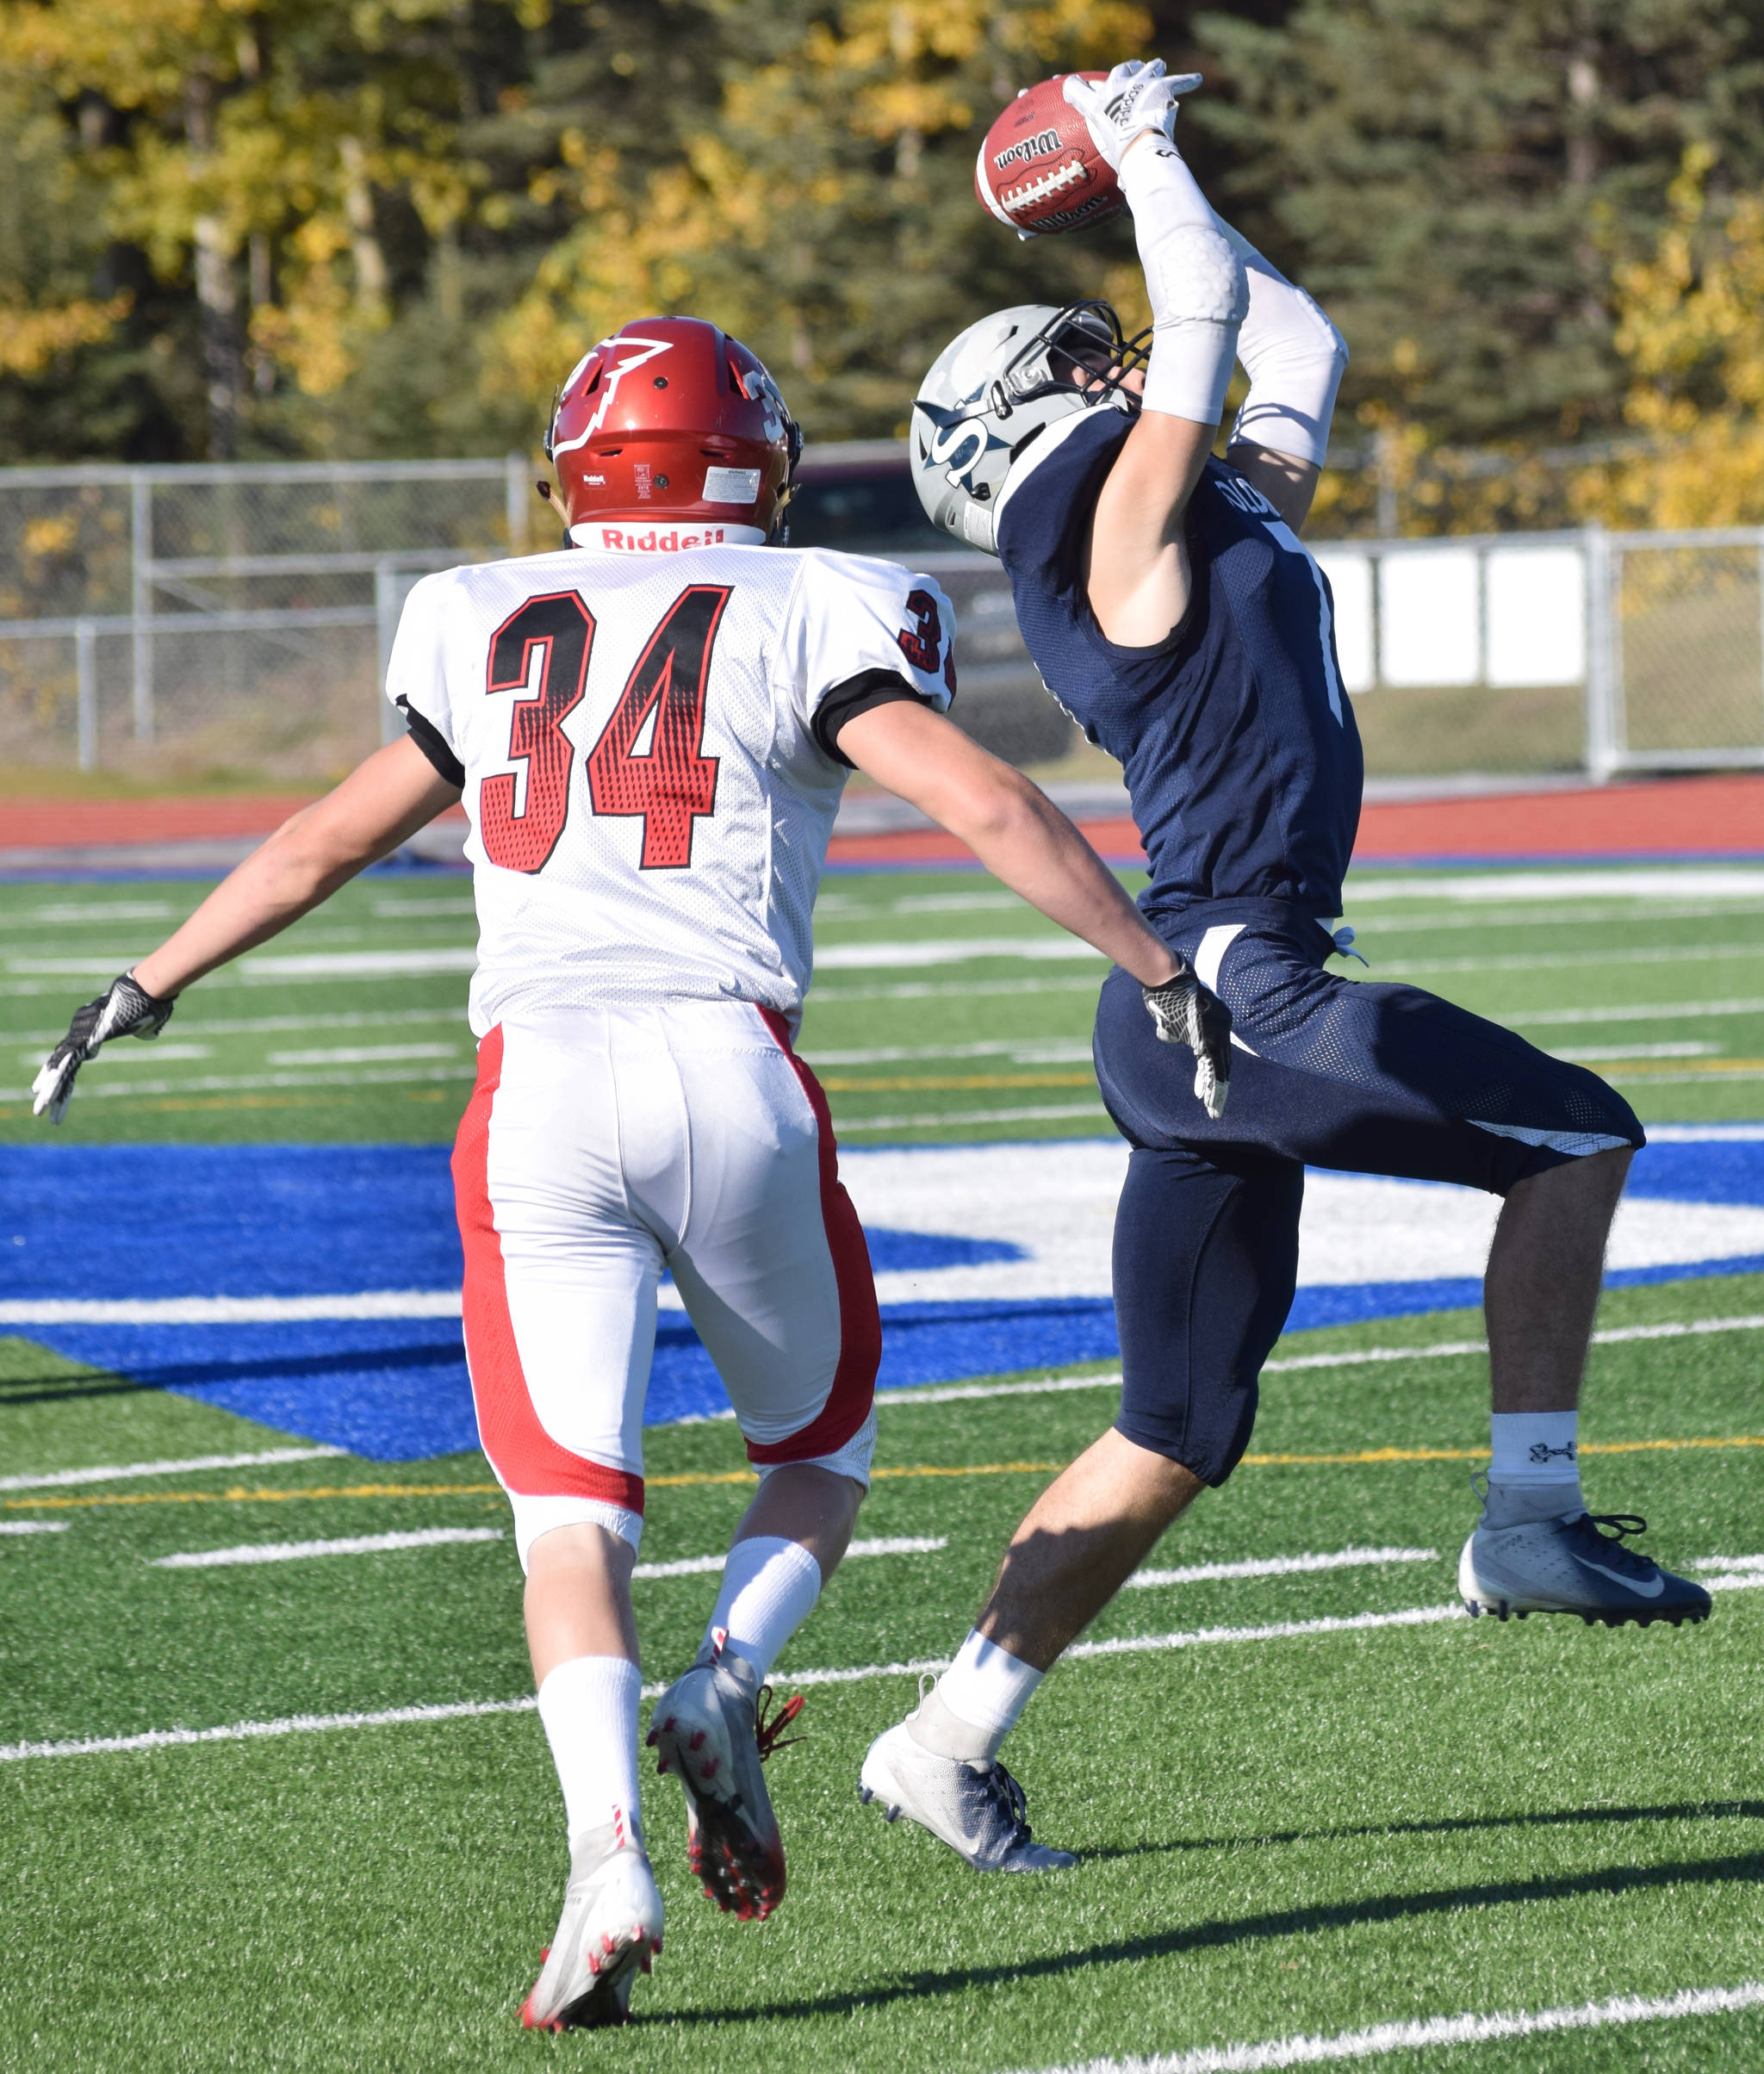 Soldotna’s Wyatt Medcoff picks off Kenai Central quarterback Connor Felchle in front of intended receiver Joey Sylvester on Saturday, Sept. 29, 2018, at Justin Maile Field in Soldotna. (Photo by Jeff Helminiak/Peninsula Clarion)